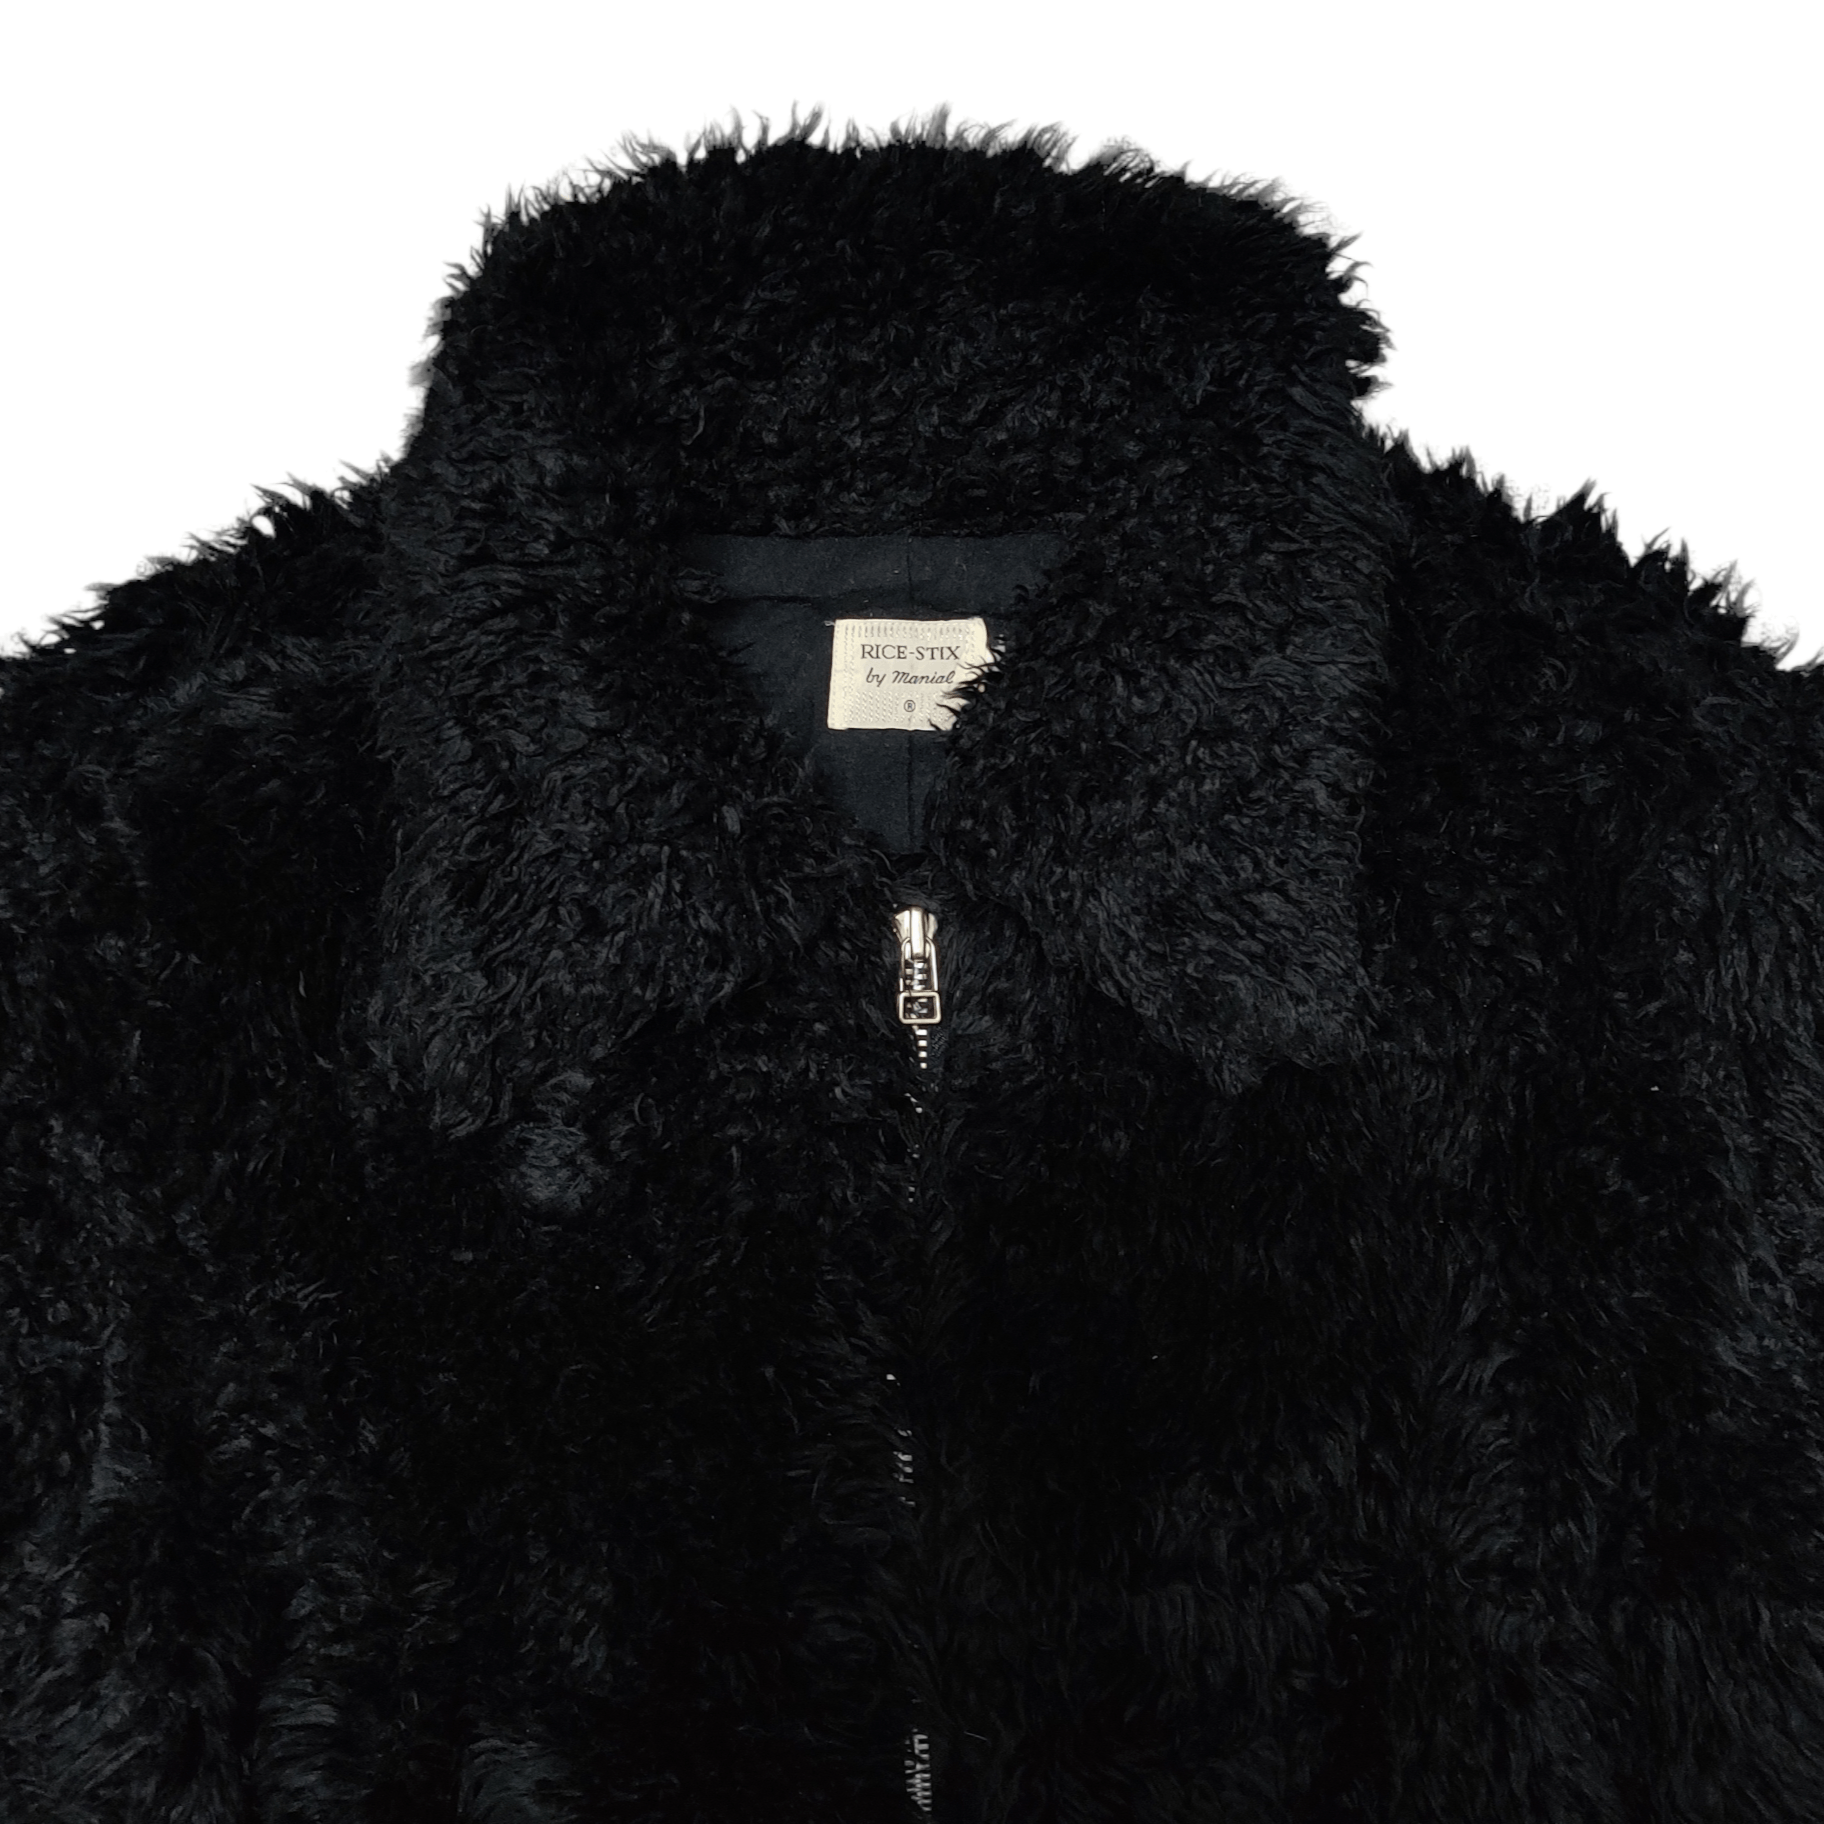 Archival Clothing - Vintage Japanese Brand Rice-Stix by Manial Fur Zip Up - 2